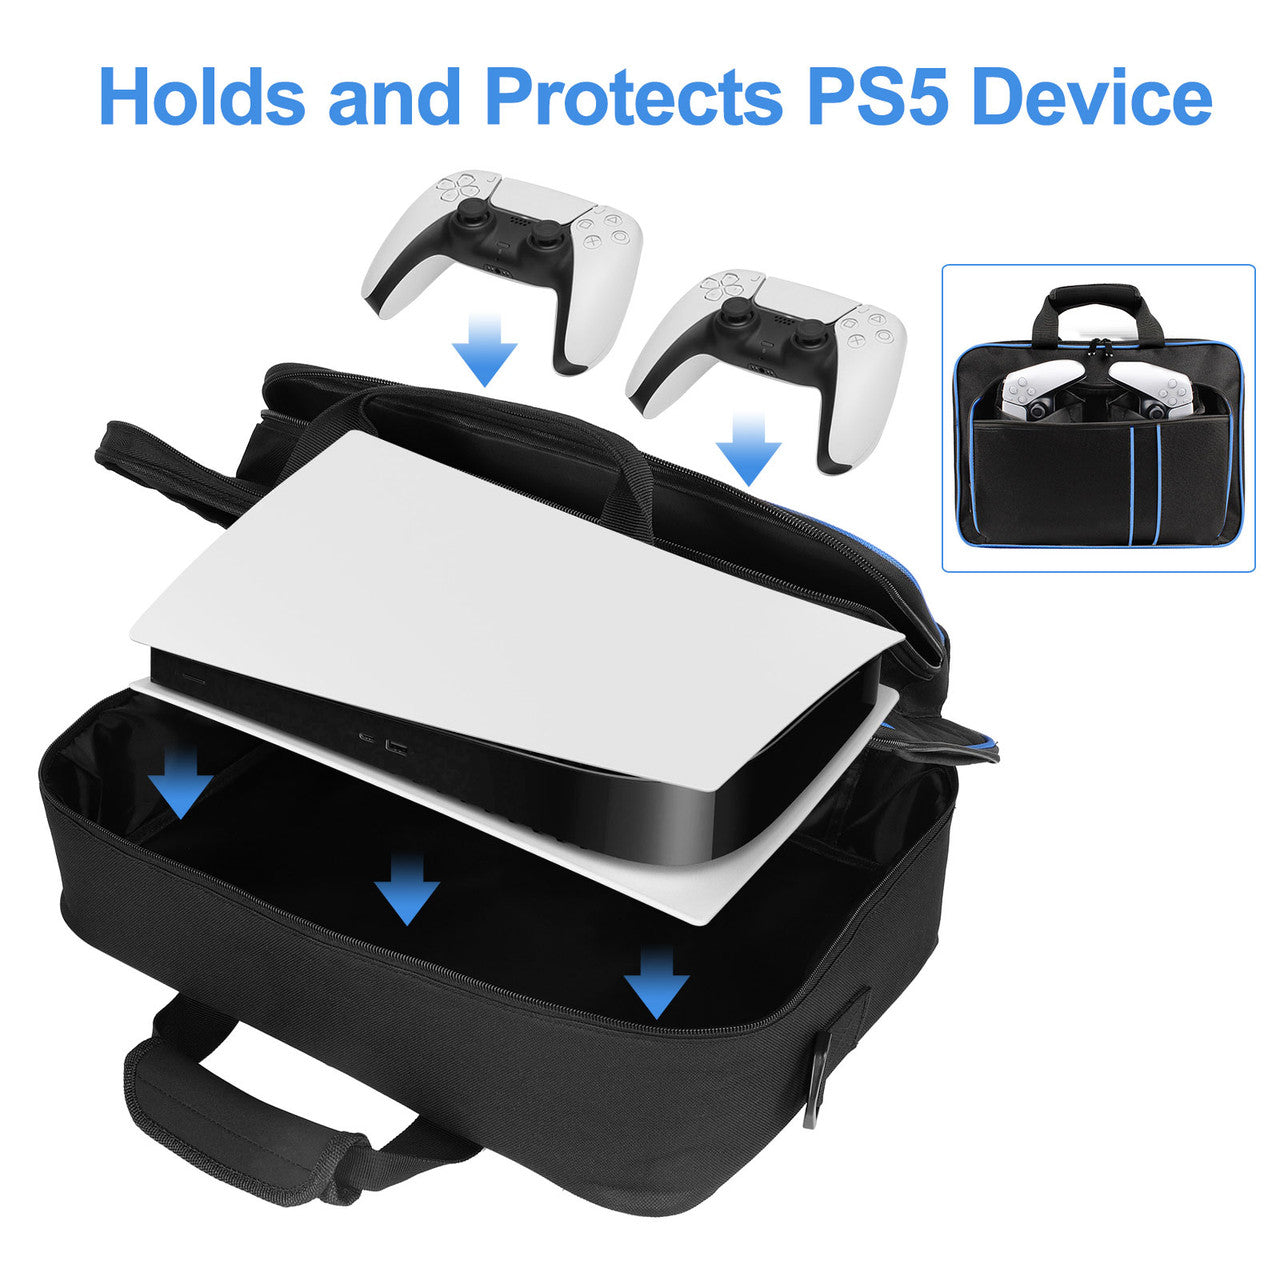 Carrying Case Travel Storage Pouch Shoulder Bag for Console Game Accessories PS5